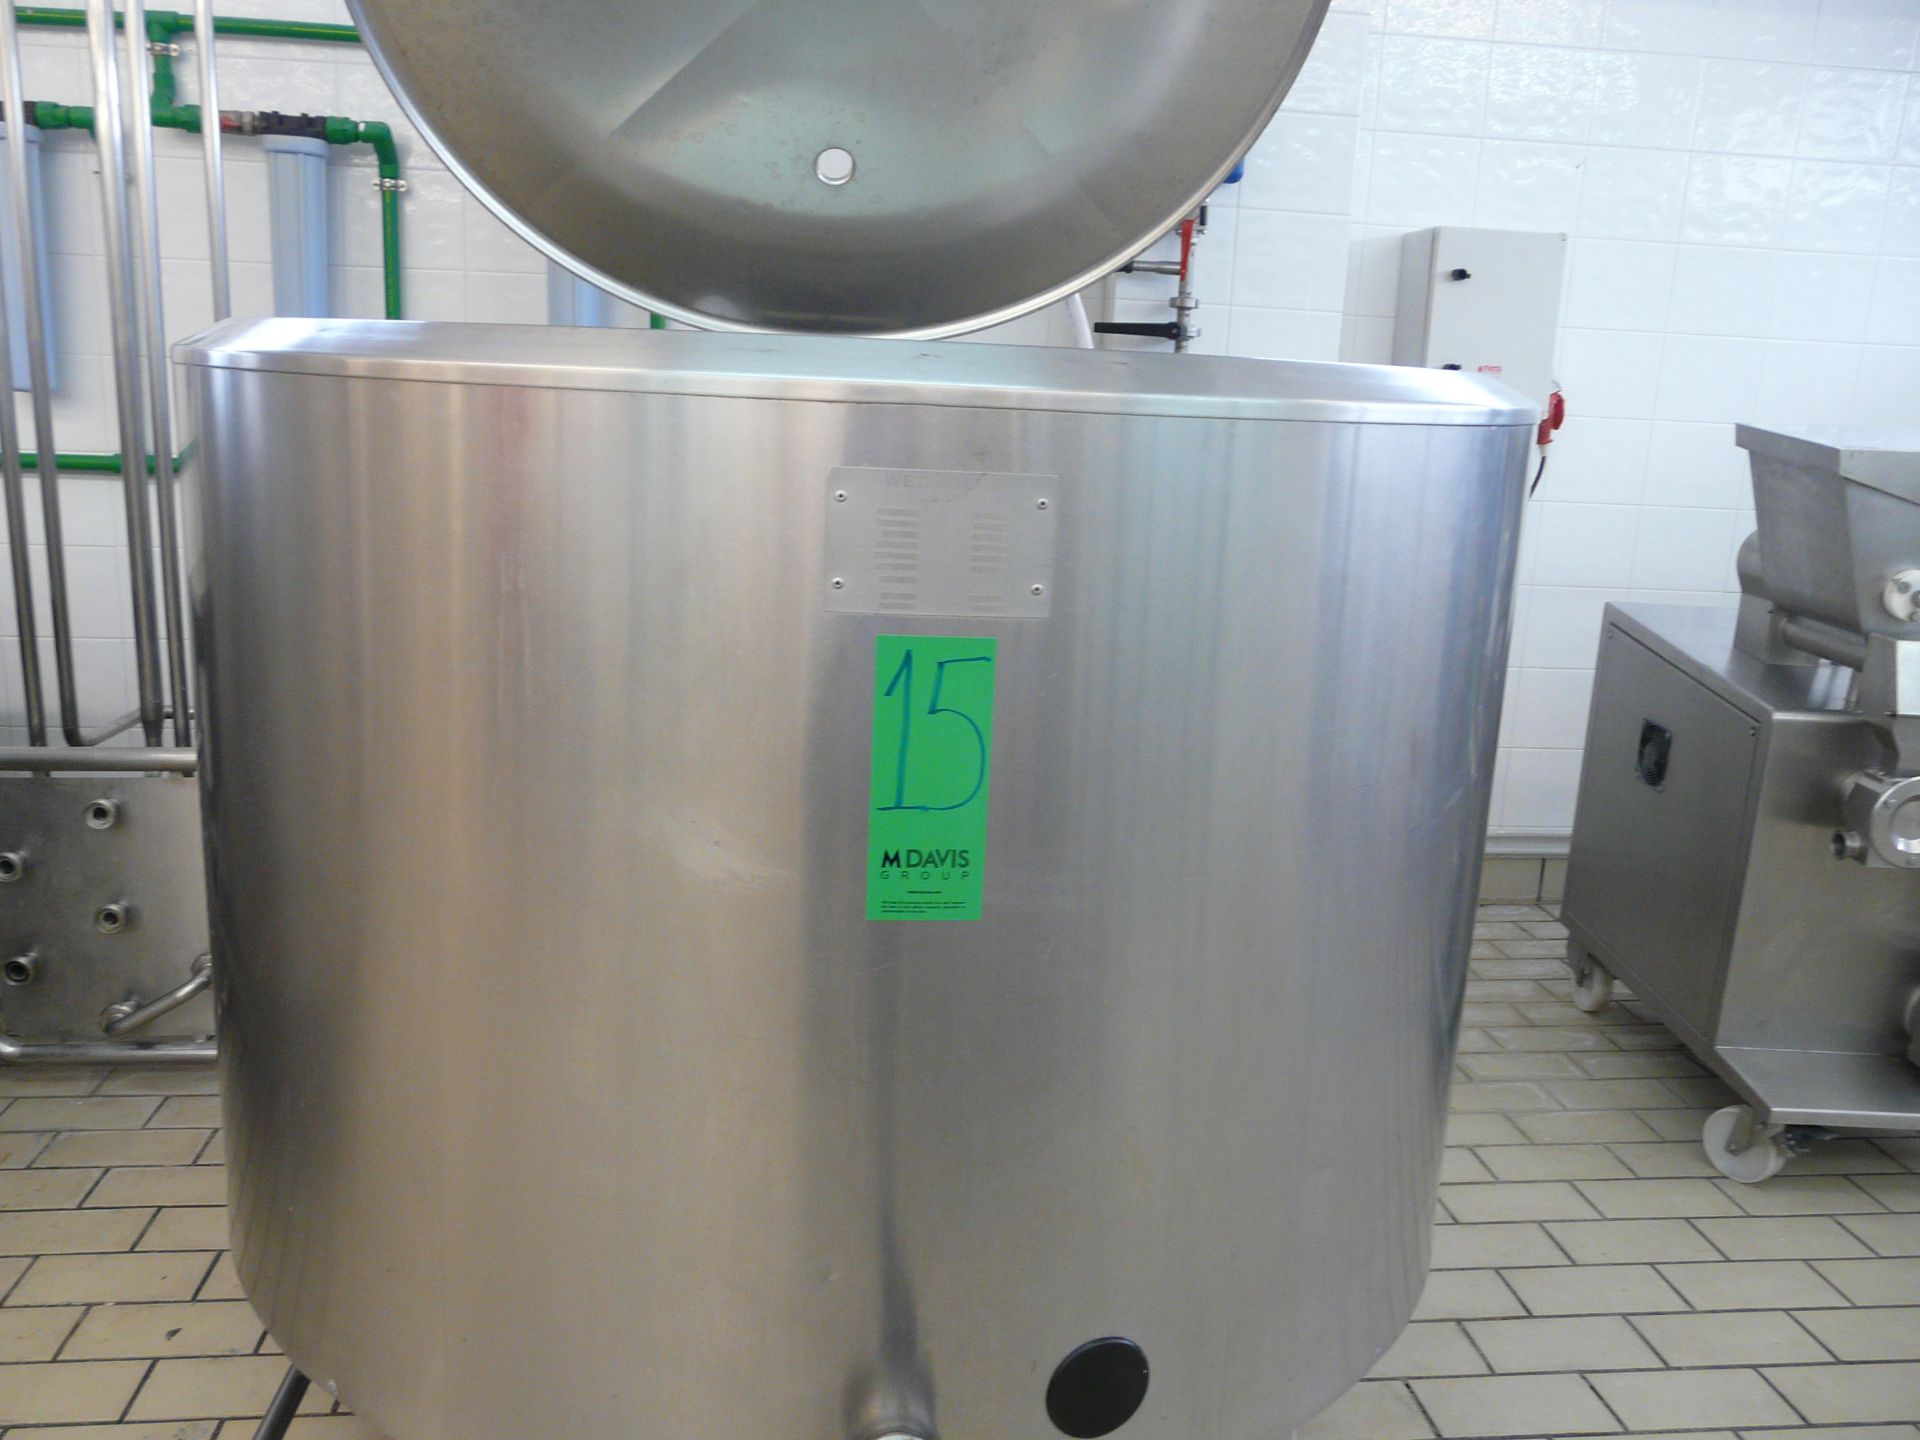 English: Mixing/Cooling Tank for Ice Cream 1020L with Agitator, Type WEDHOLMS, Self Contained - Bild 2 aus 5